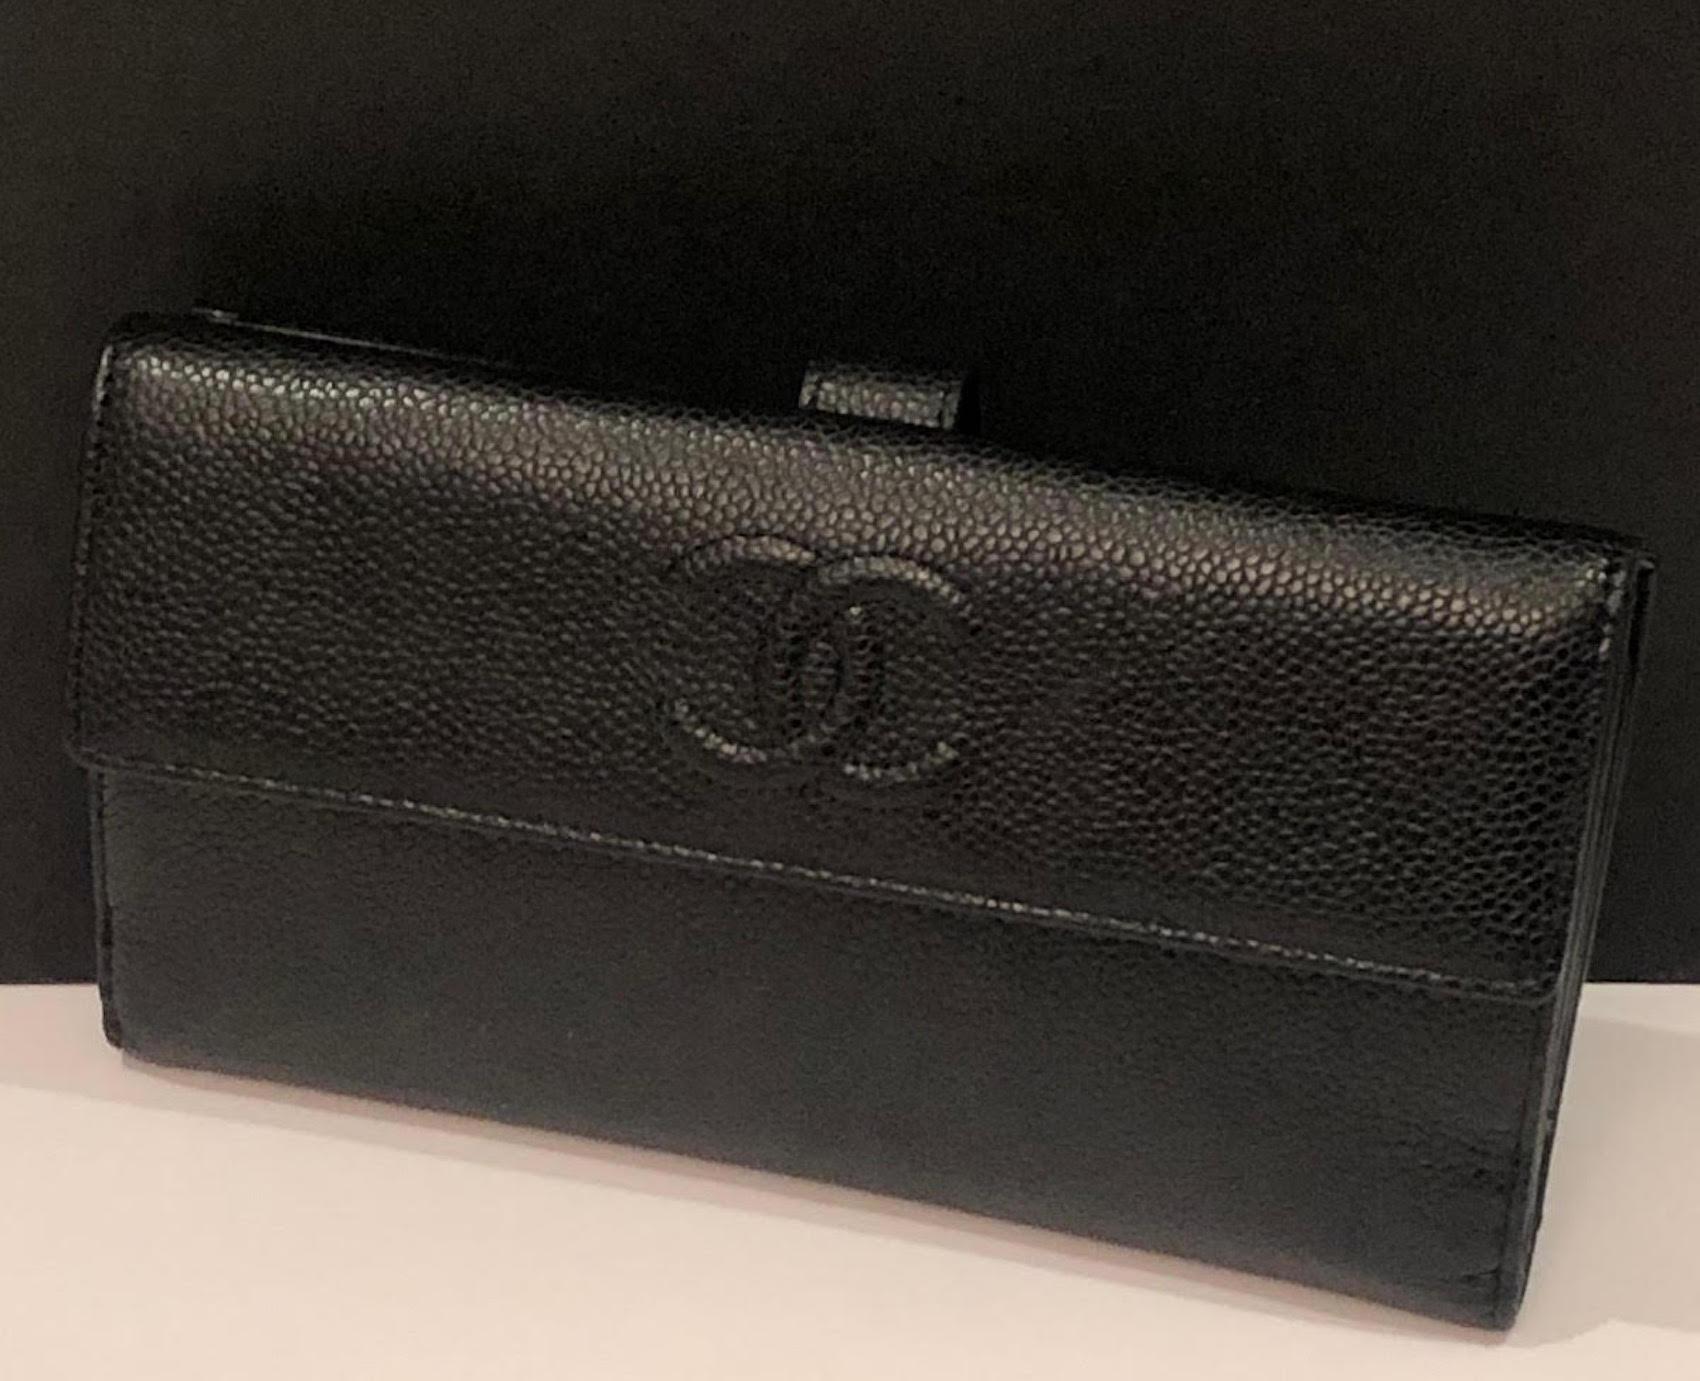 CHANEL Black Caviar Leather CC Logo Long Snap Bifold Wallet 2010 W/Box In Excellent Condition For Sale In London, GB